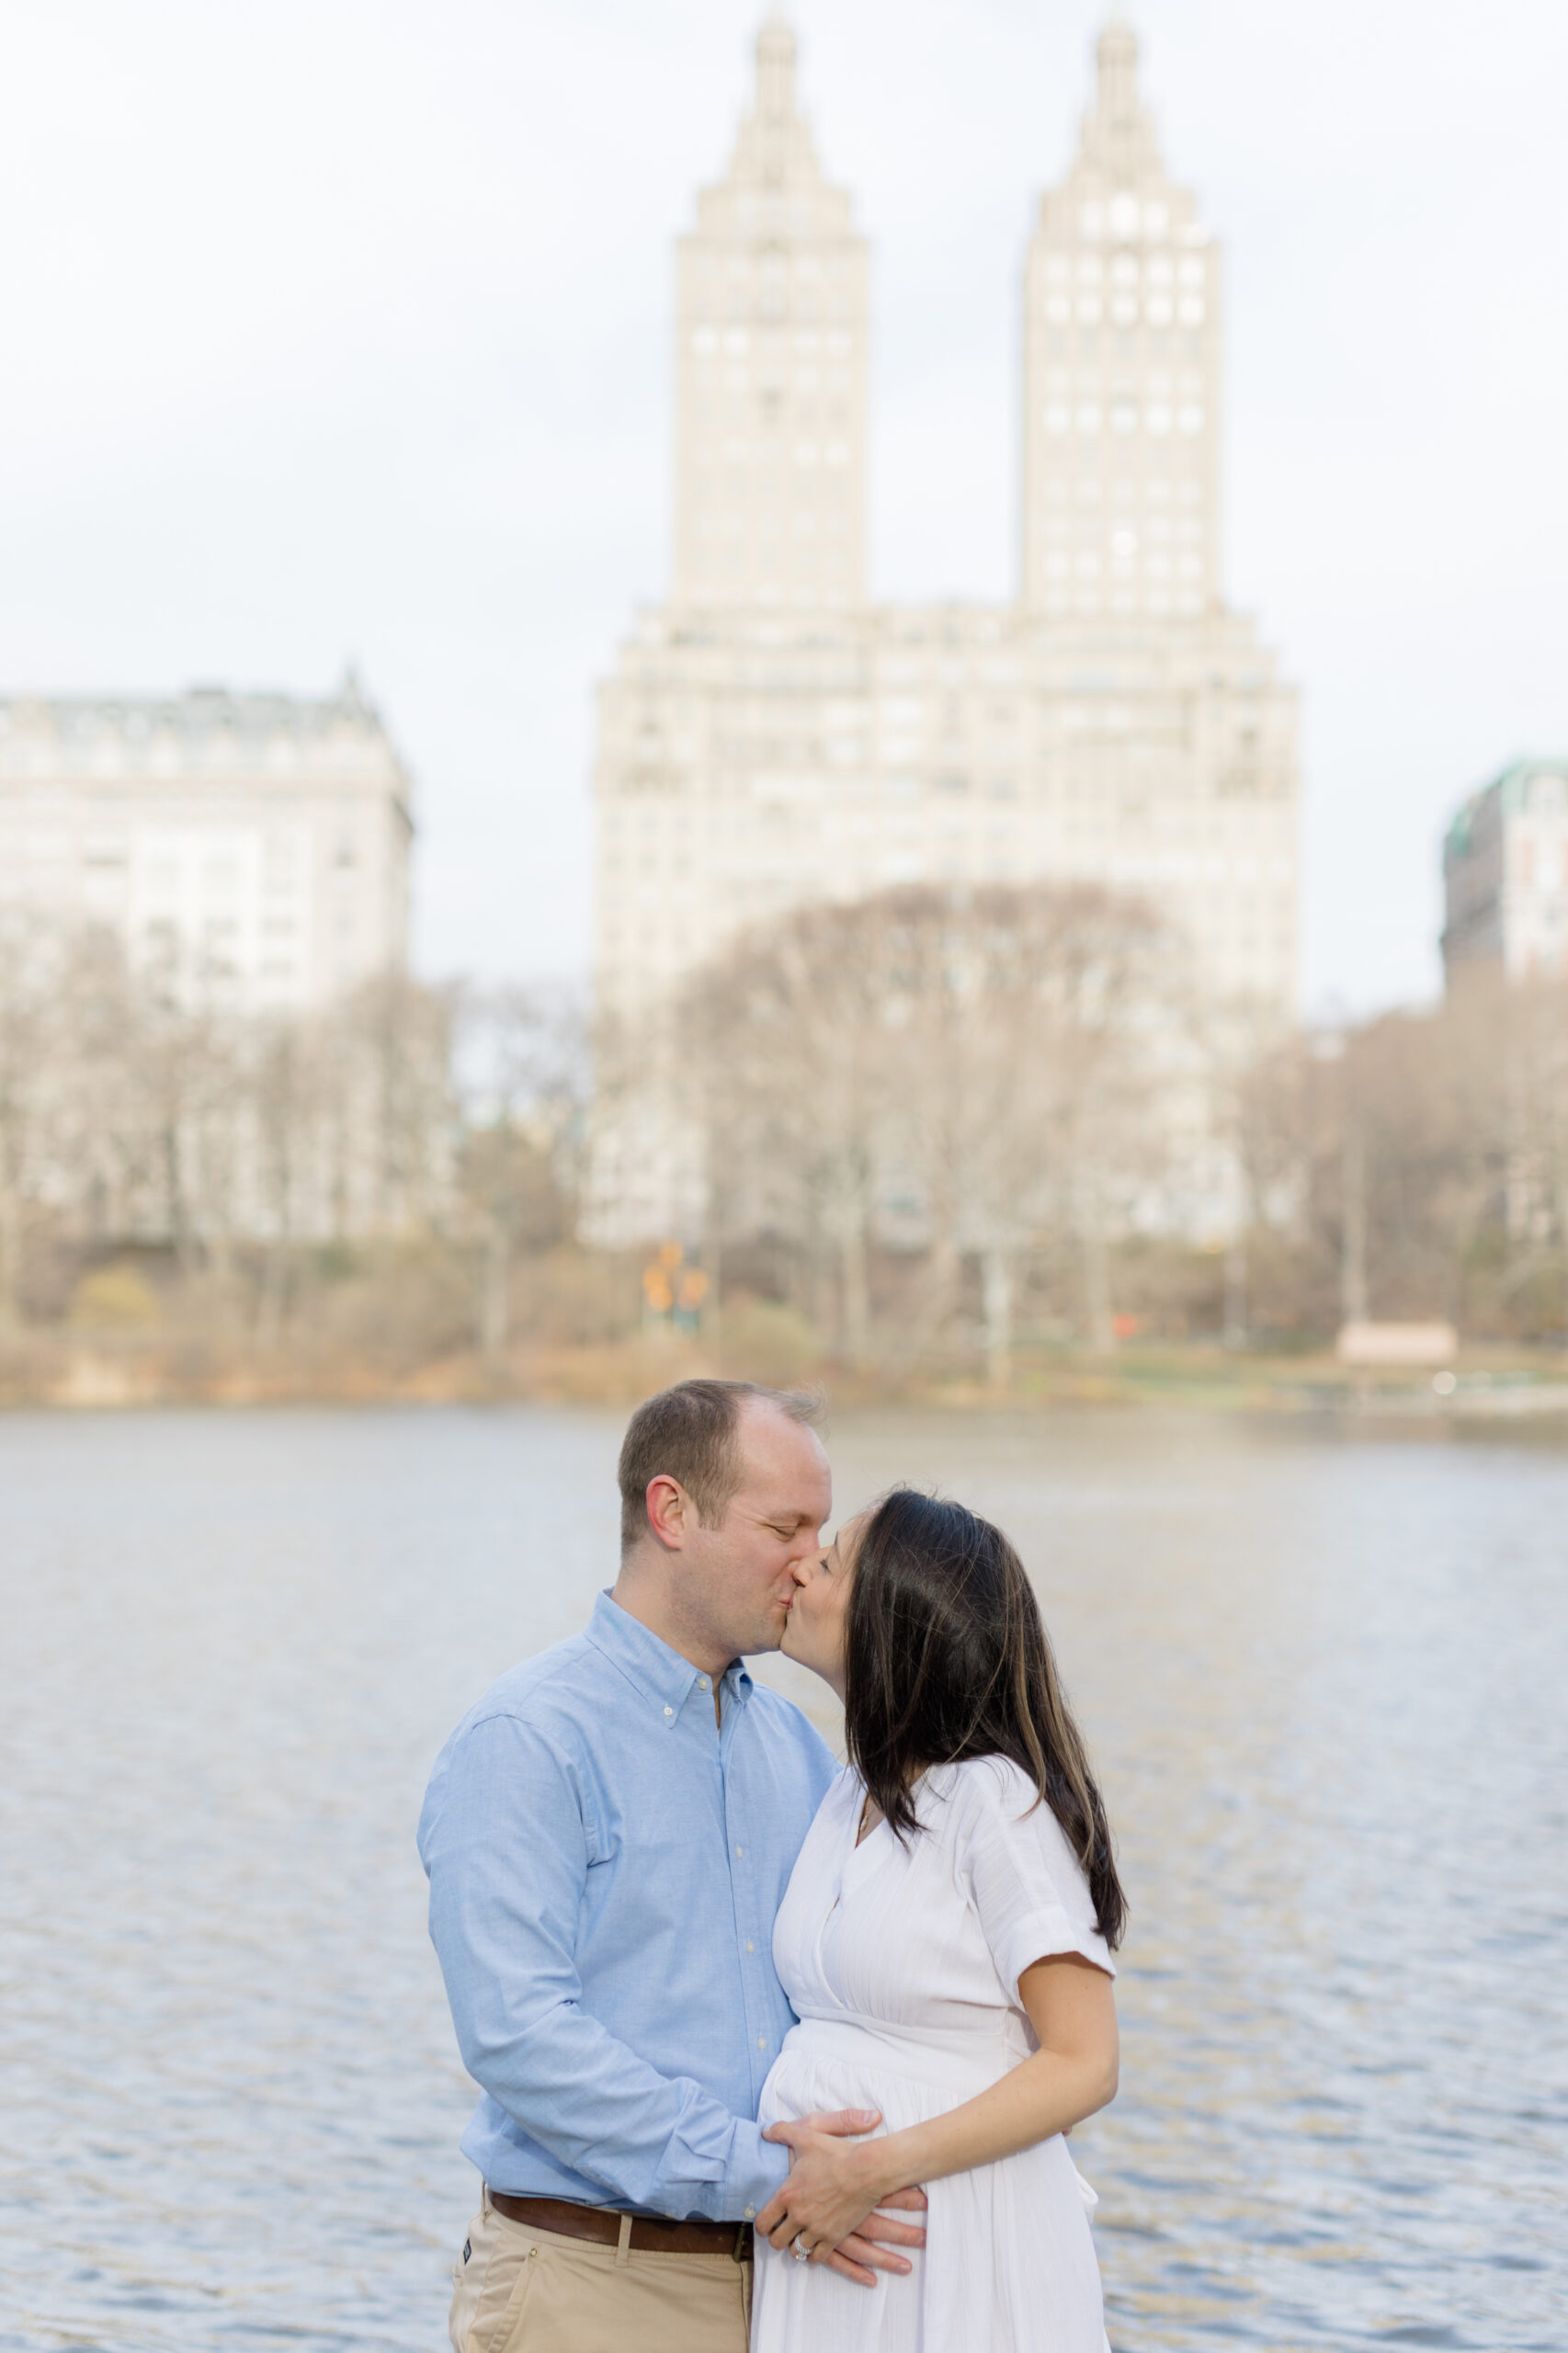 An expecting couple kiss in Central Park during a New York City maternity photography session with Jacqueline Clair Photography